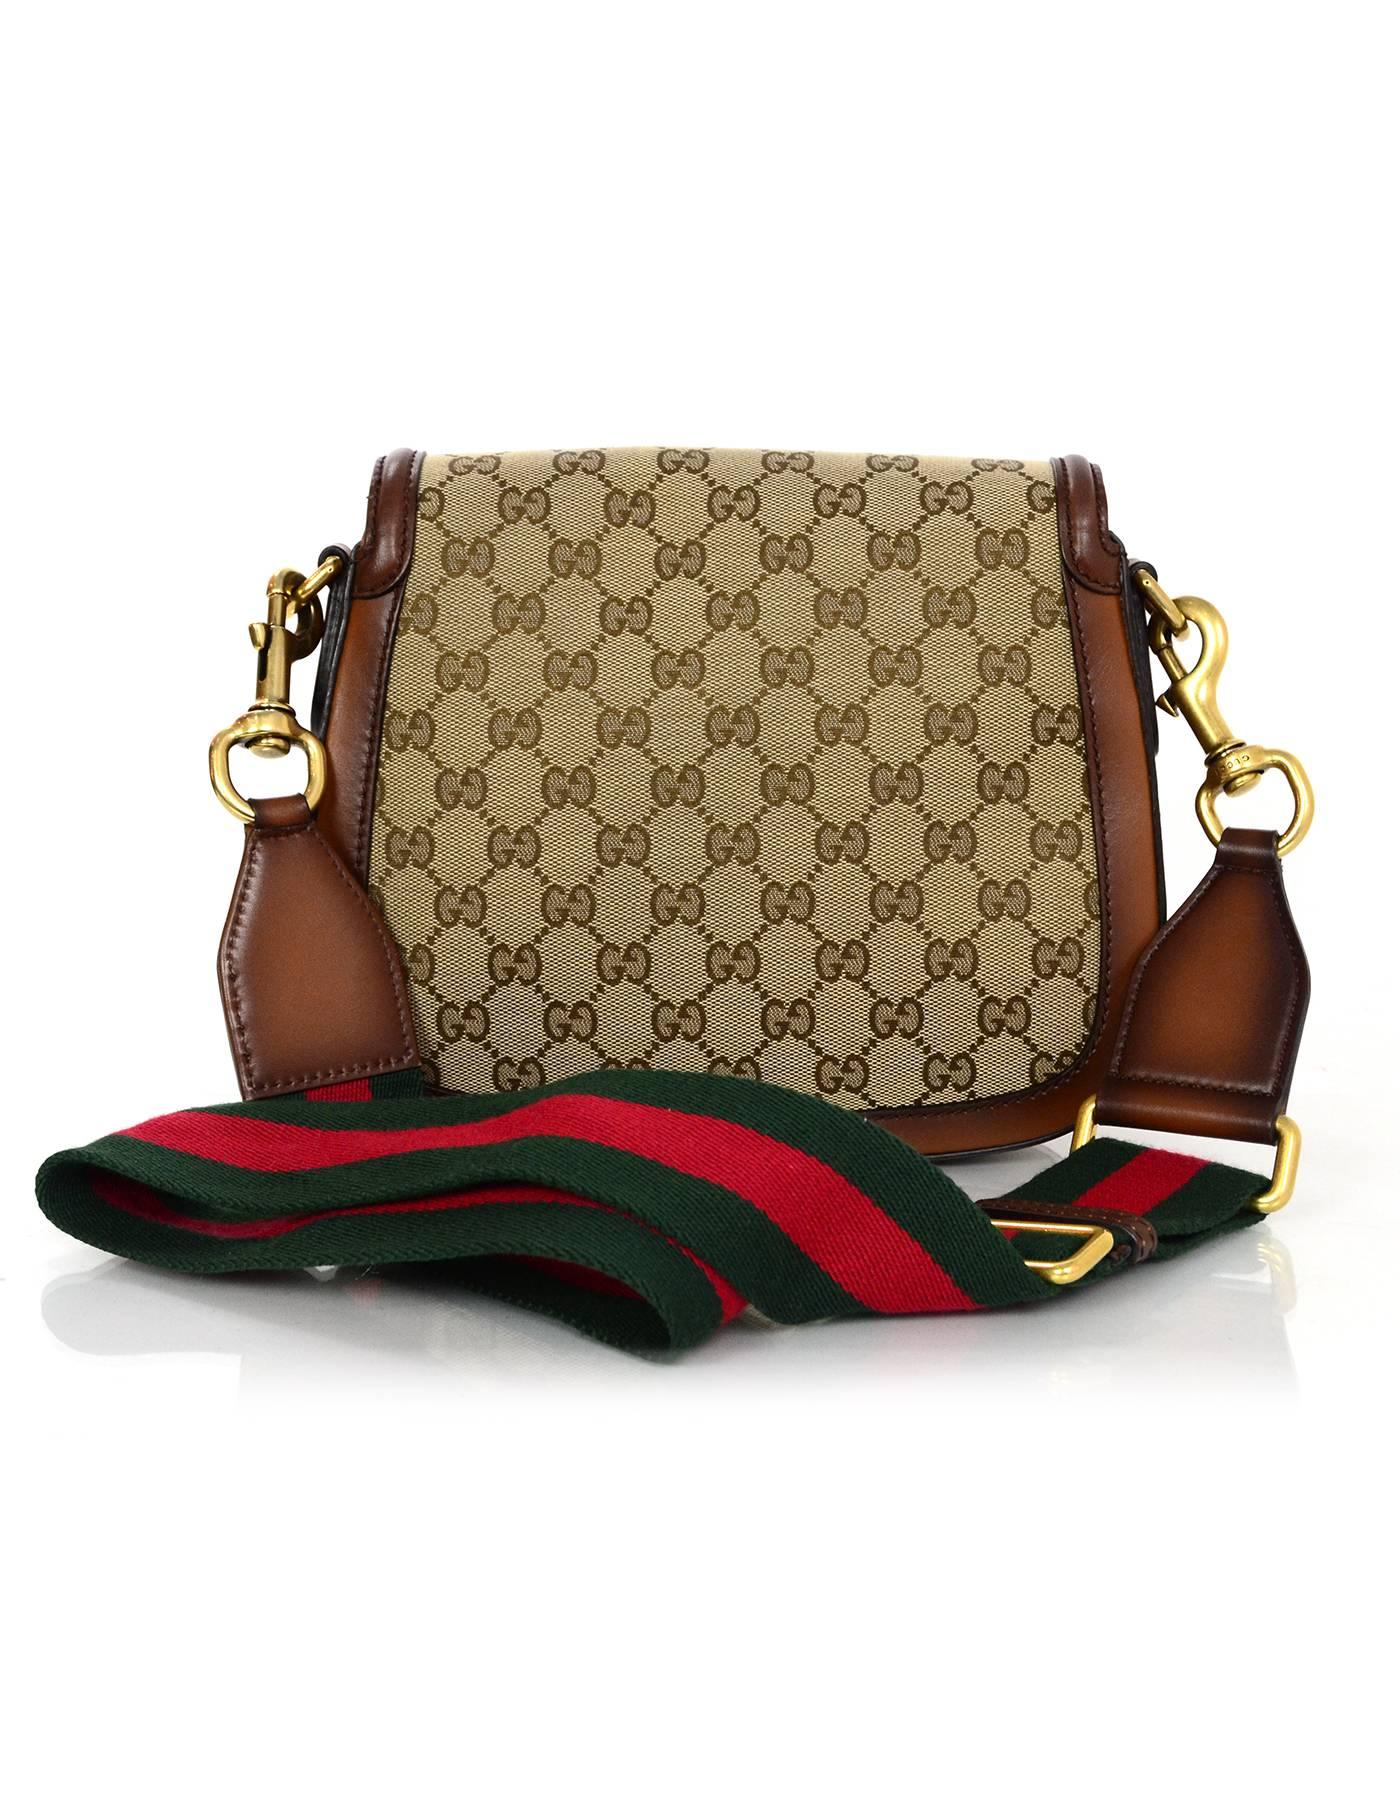 gucci purse with red and green strap